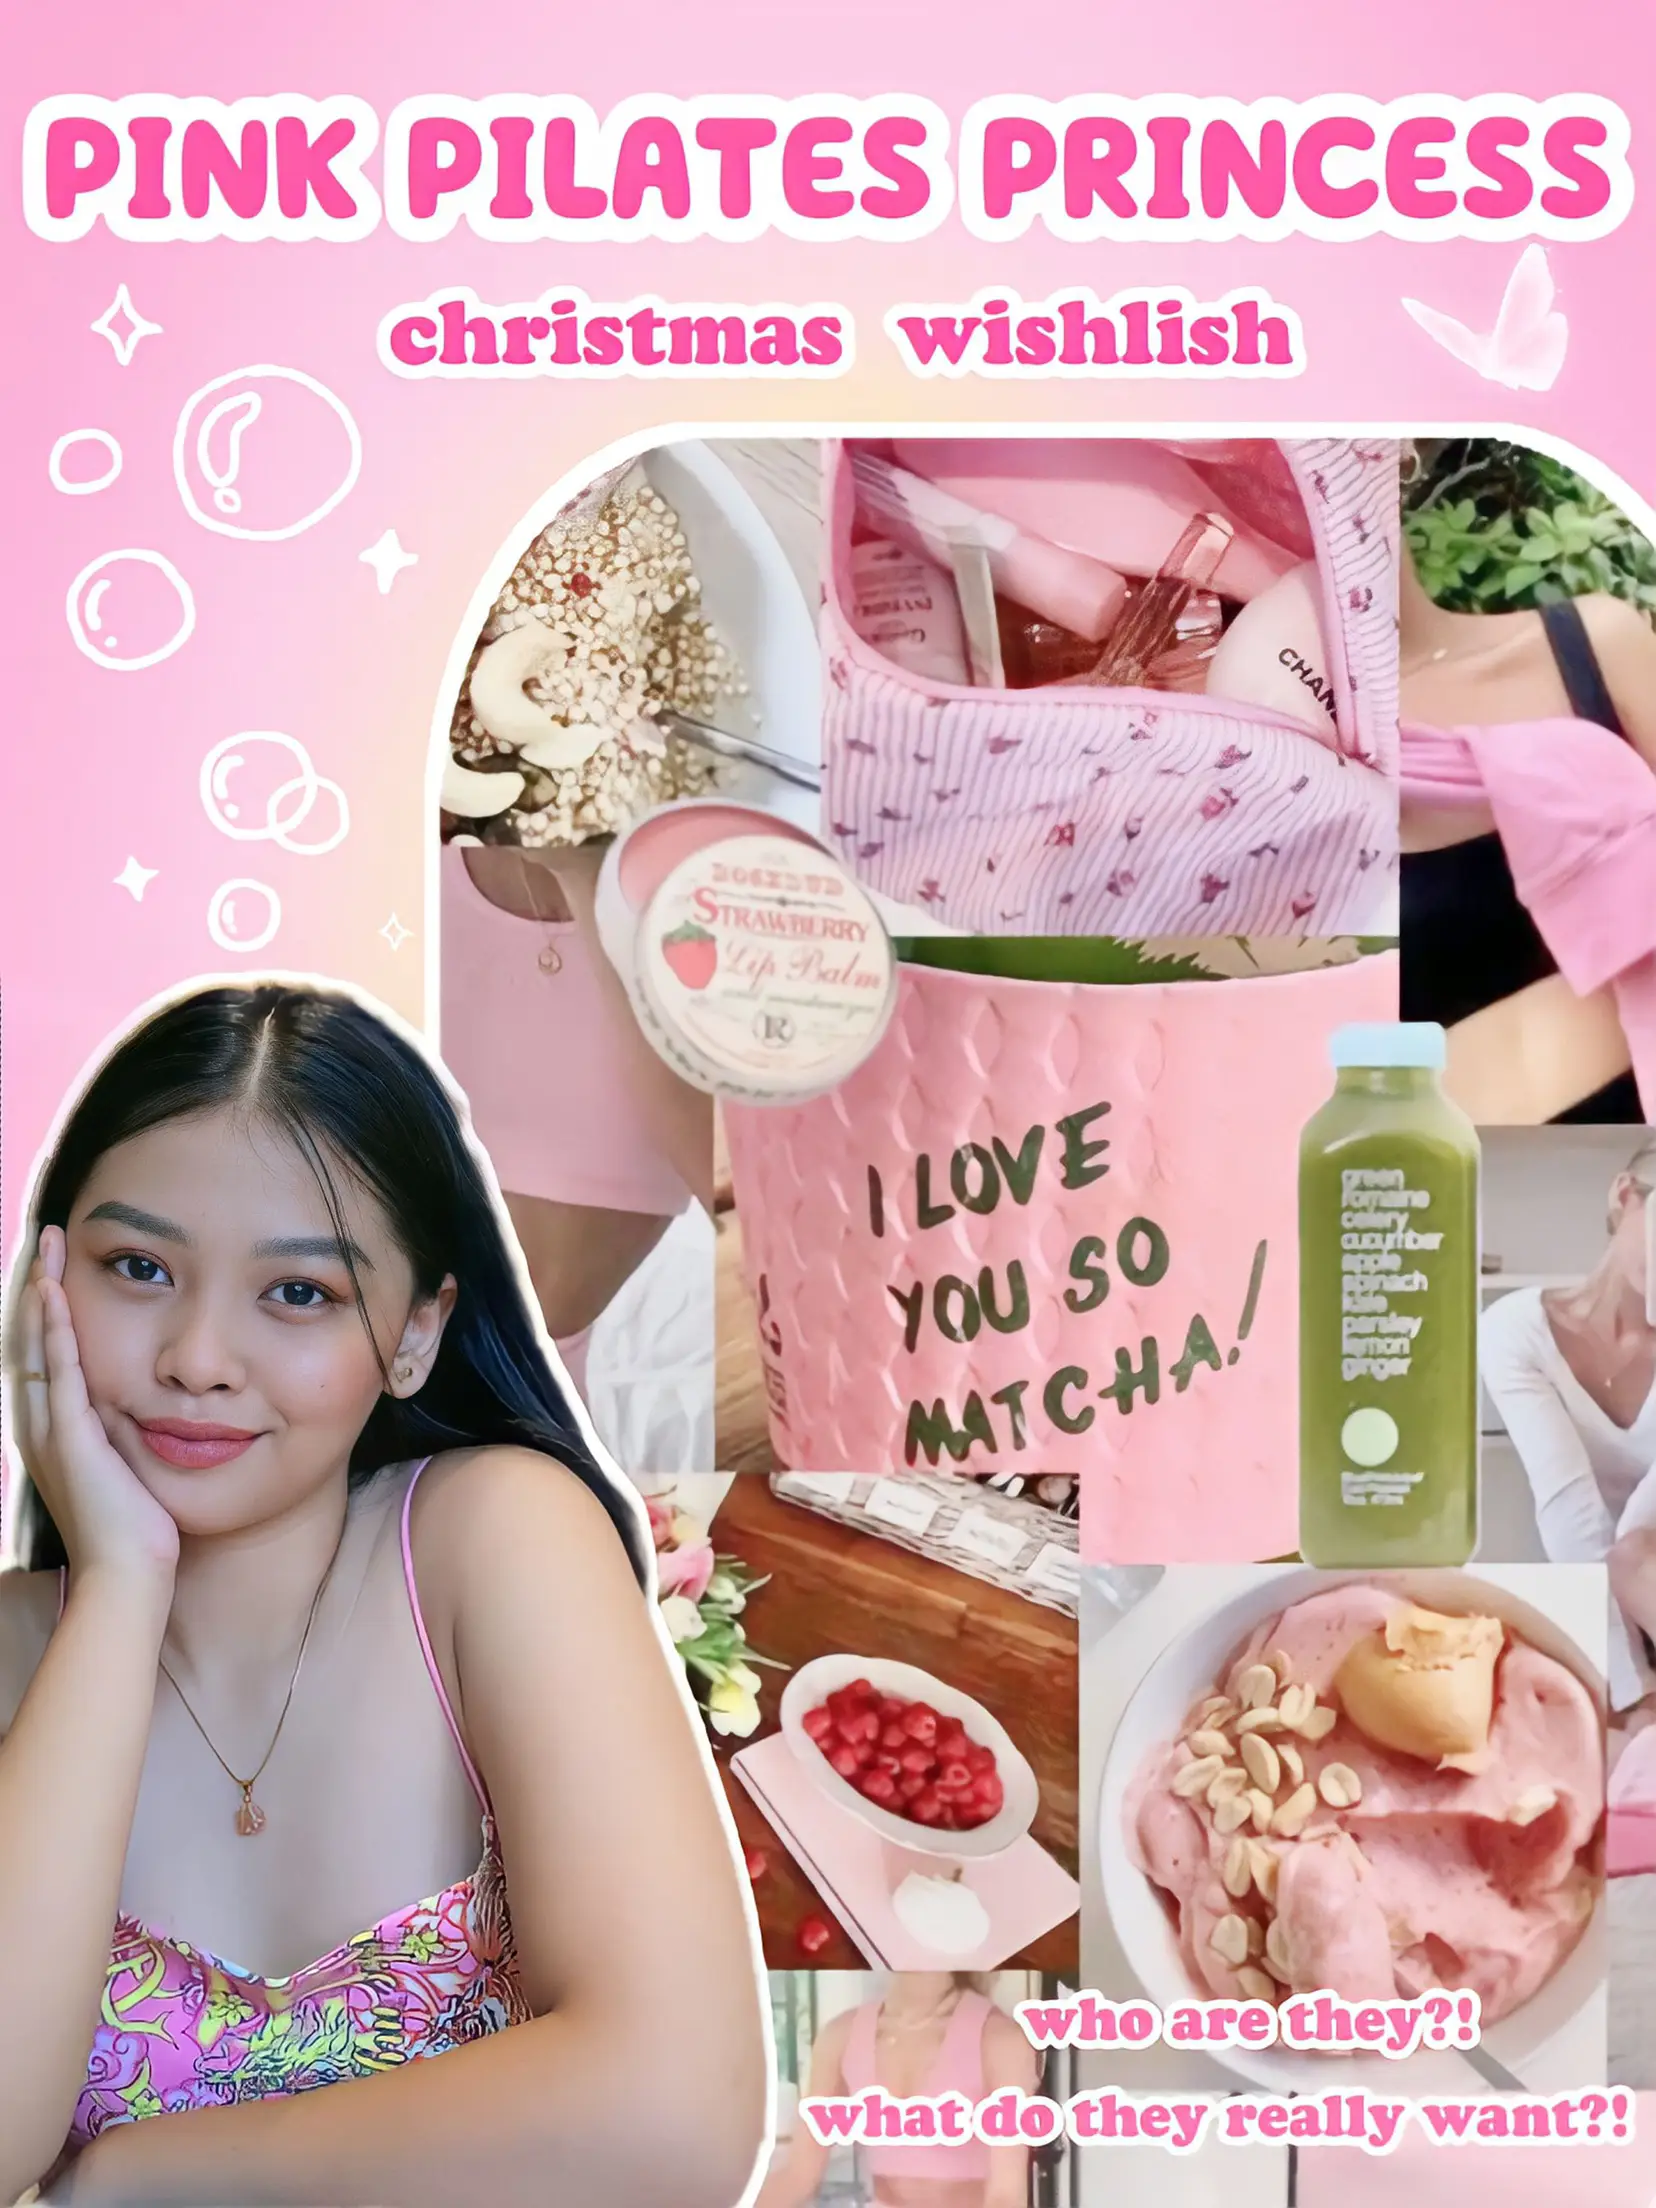 Pink pilates princess Christmas wishlist and gift ideas 🛍 #coquetteae